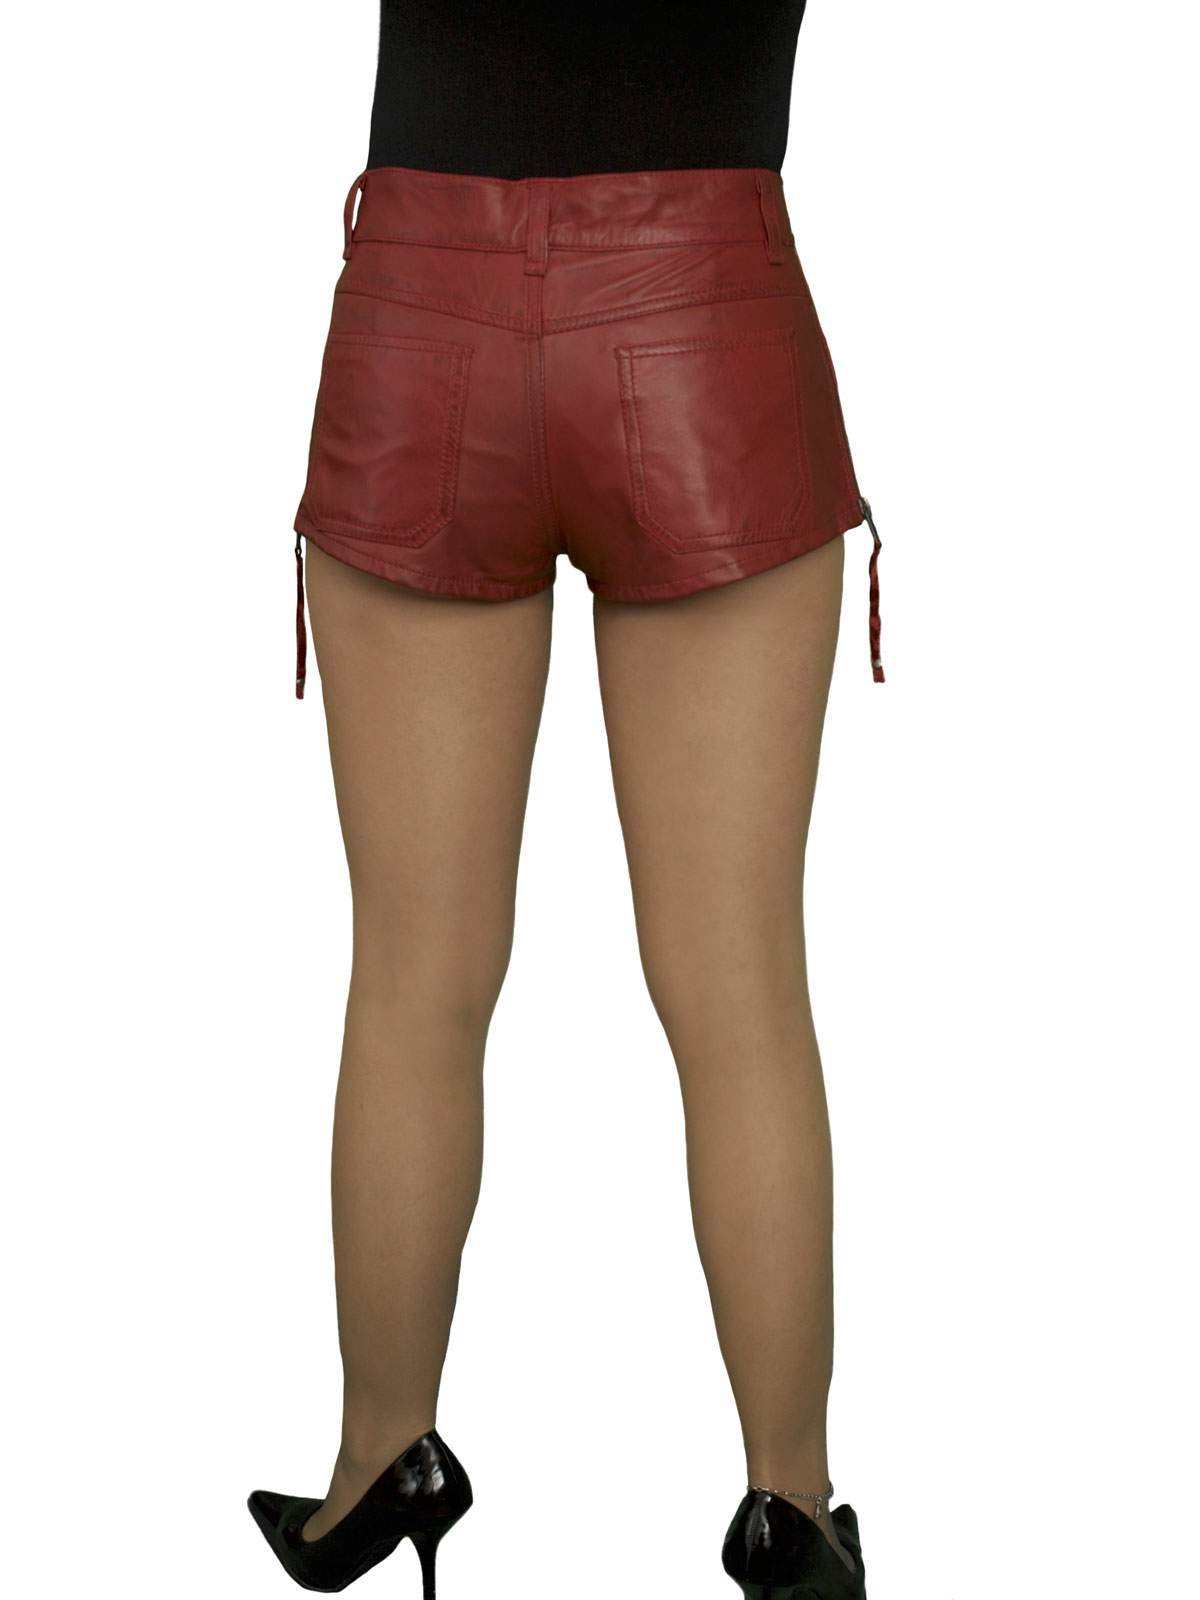 red leather boxer short